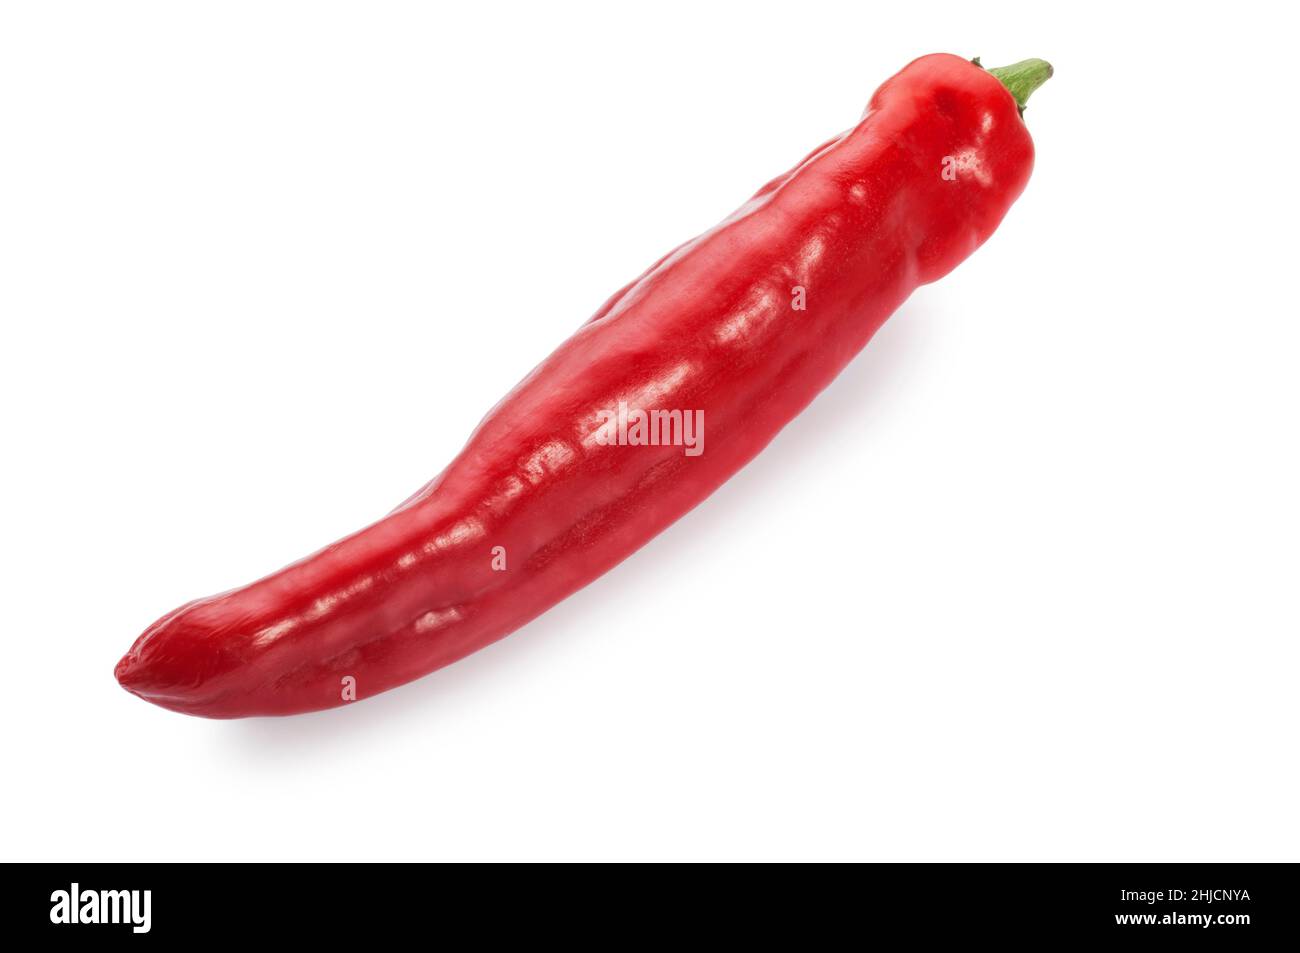 Studio shot of a single jalapeño pepper cut out against a white background - John Gollop Stock Photo